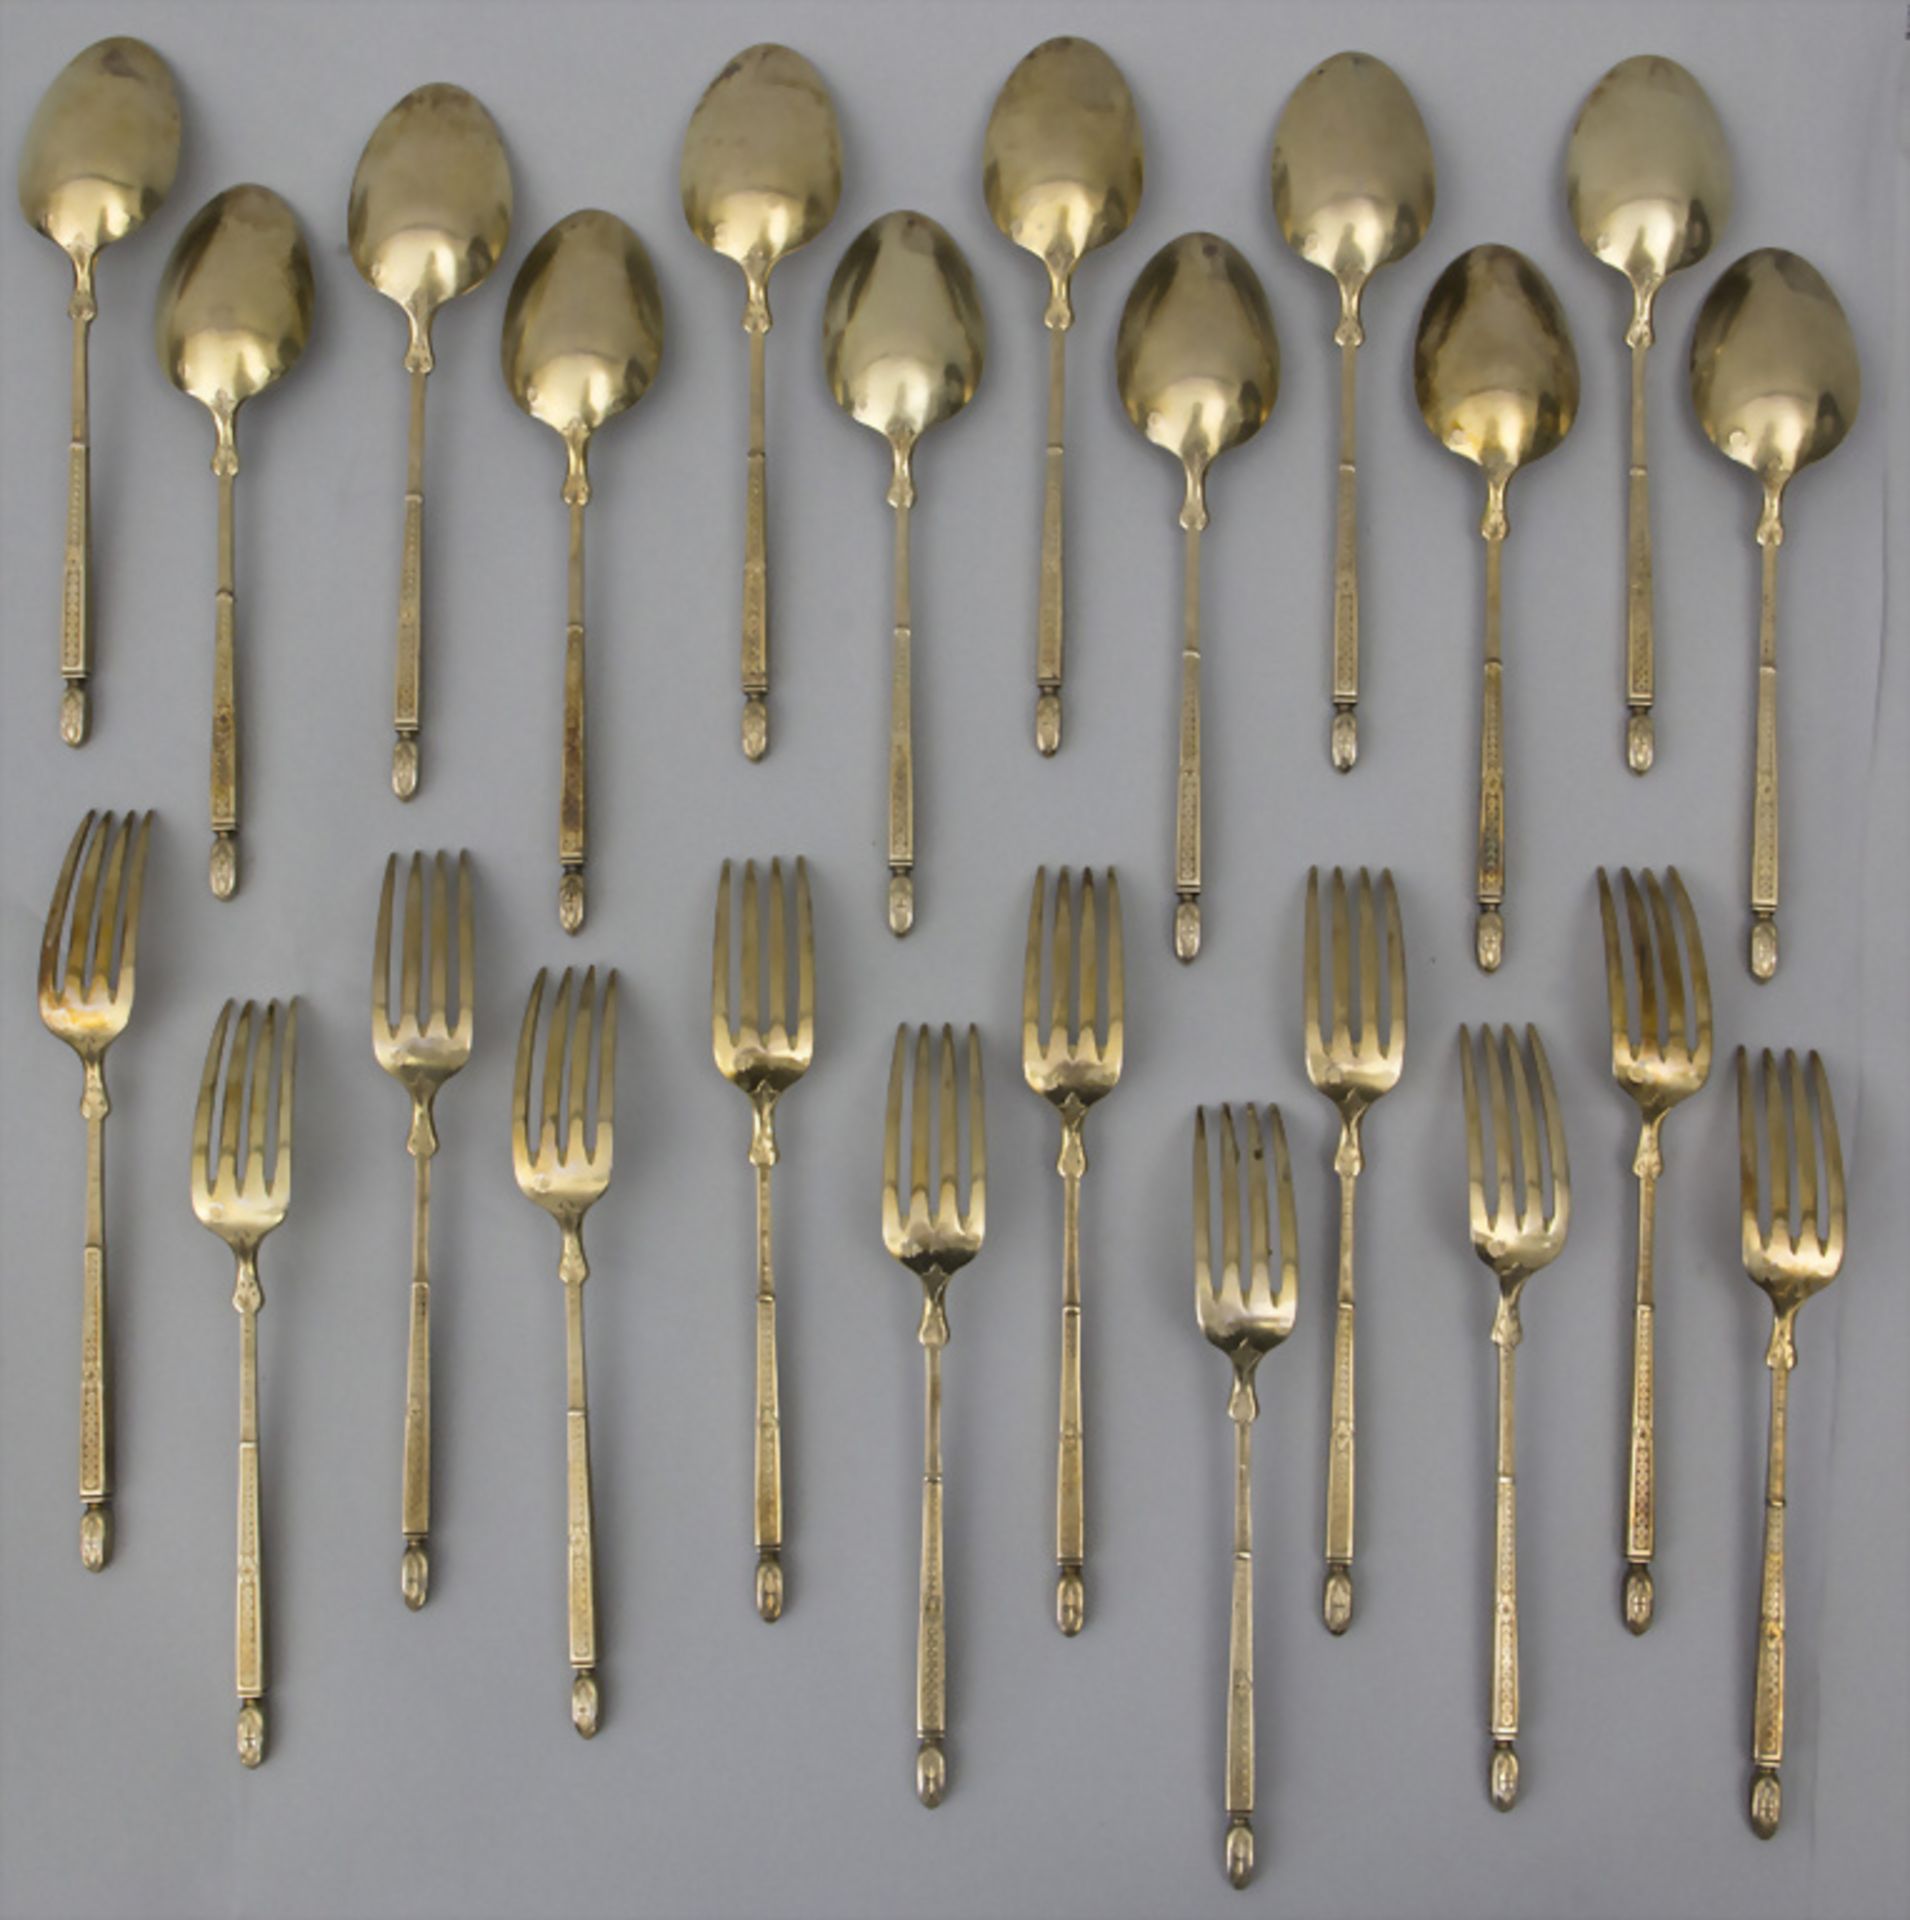 12 Gabeln + 12 Löffel / 12 silver spoons and 12 silver forks, Francois Auguste Boyer-Callot, ... - Image 2 of 10